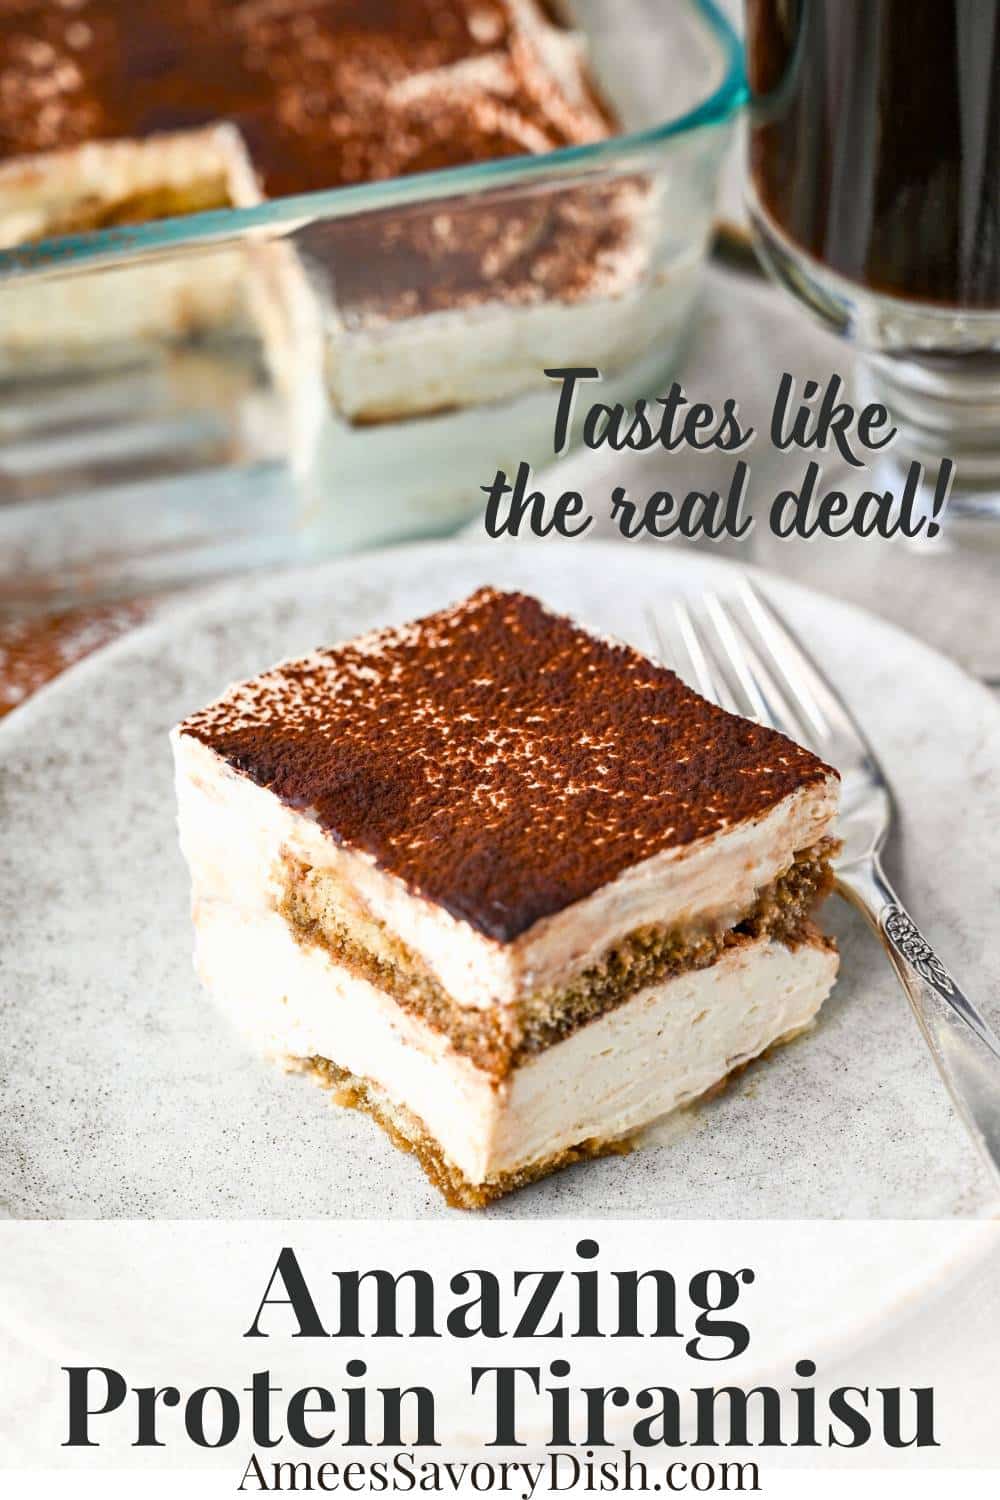 This Protein Tiramisu recipe is a lighter version that's just as tasty as the original with an added protein boost! via @Ameessavorydish